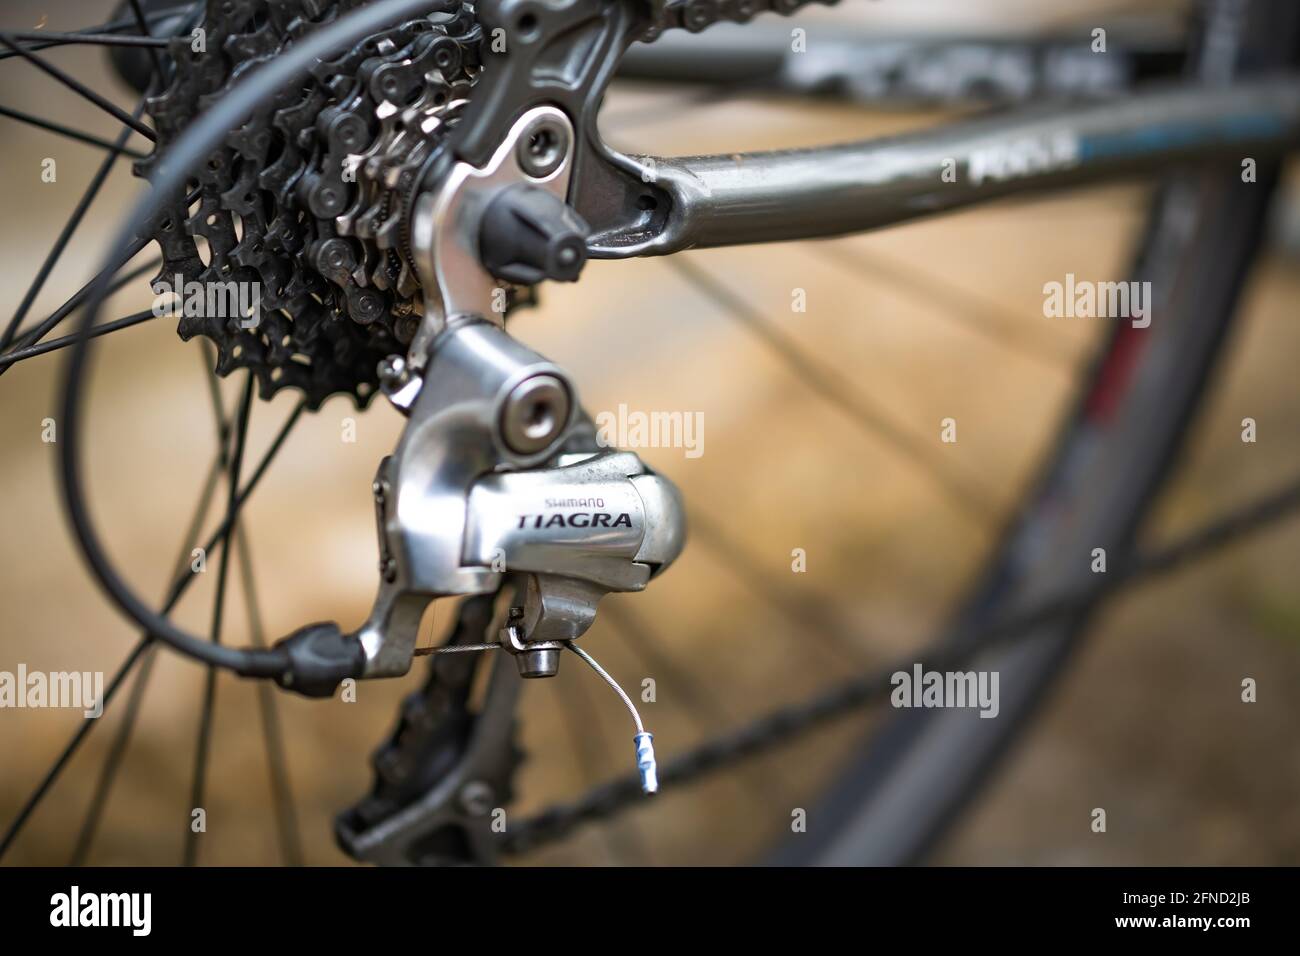 Norwich, Norfolk, UK - May 15 2021. Close and selective focus of the Shimano drive train and gear system of a road racing bicycle. Stock Photo